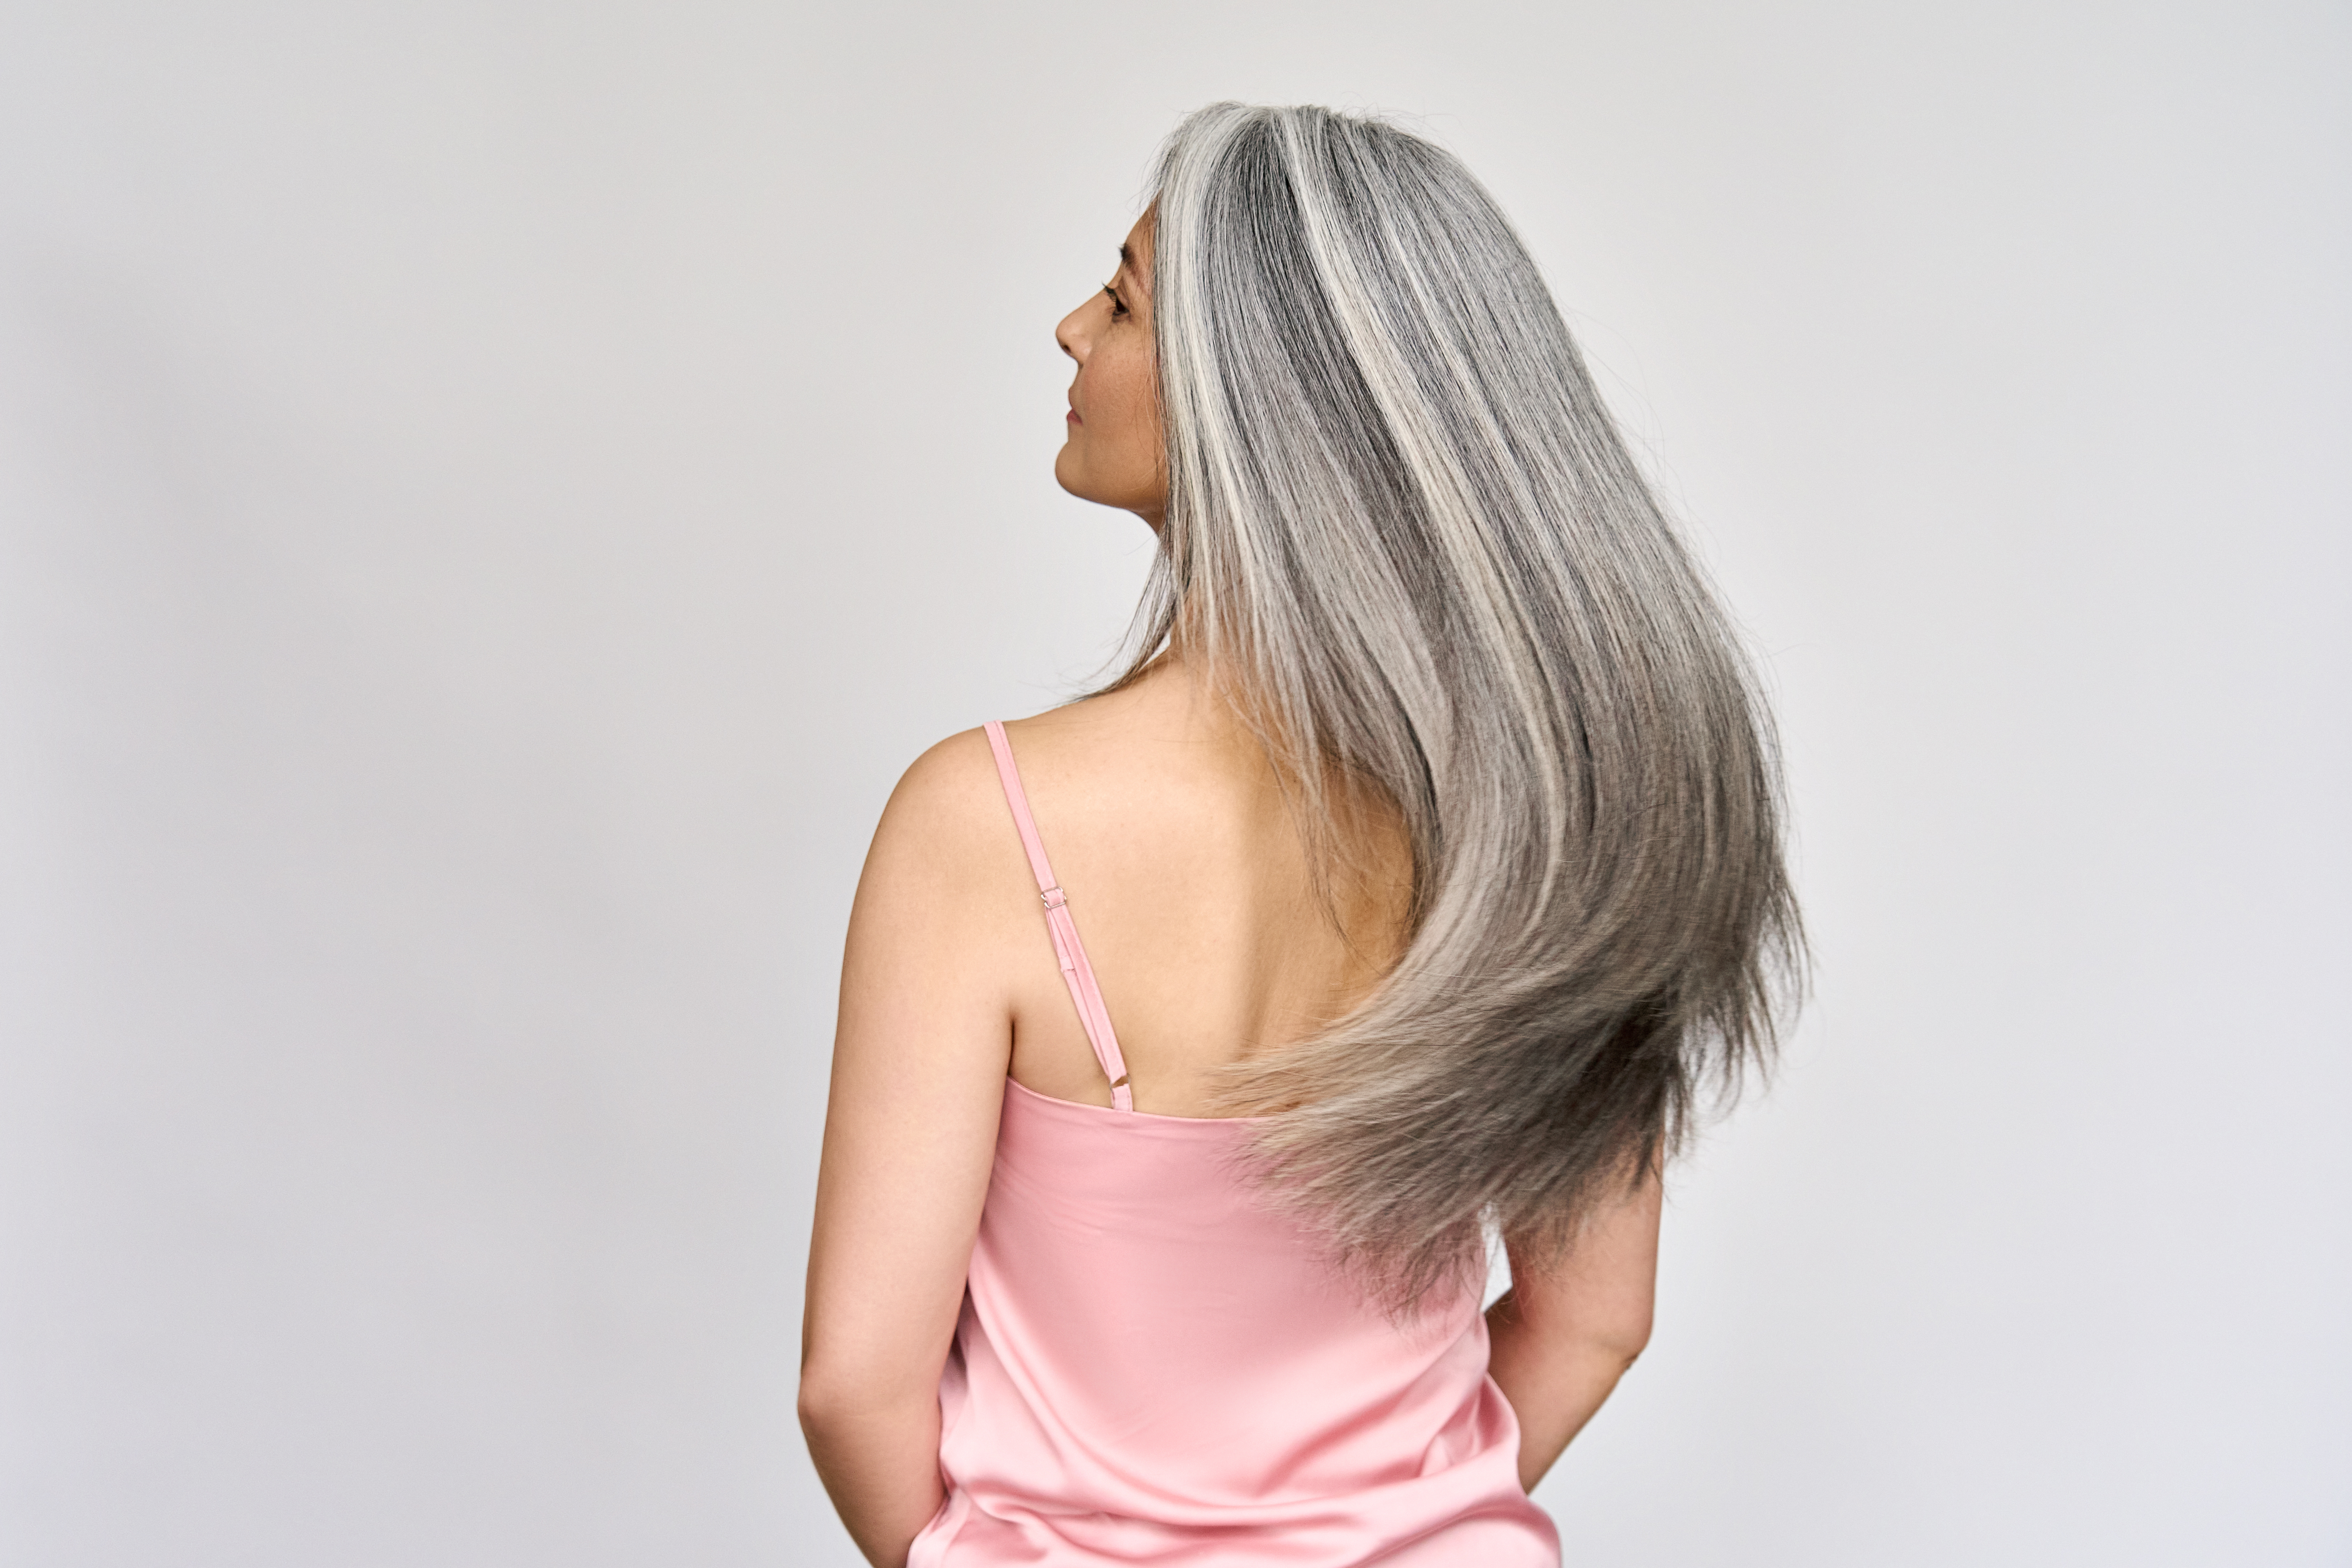 Grey-haired woman swinging her hair | Source: Shutterstock